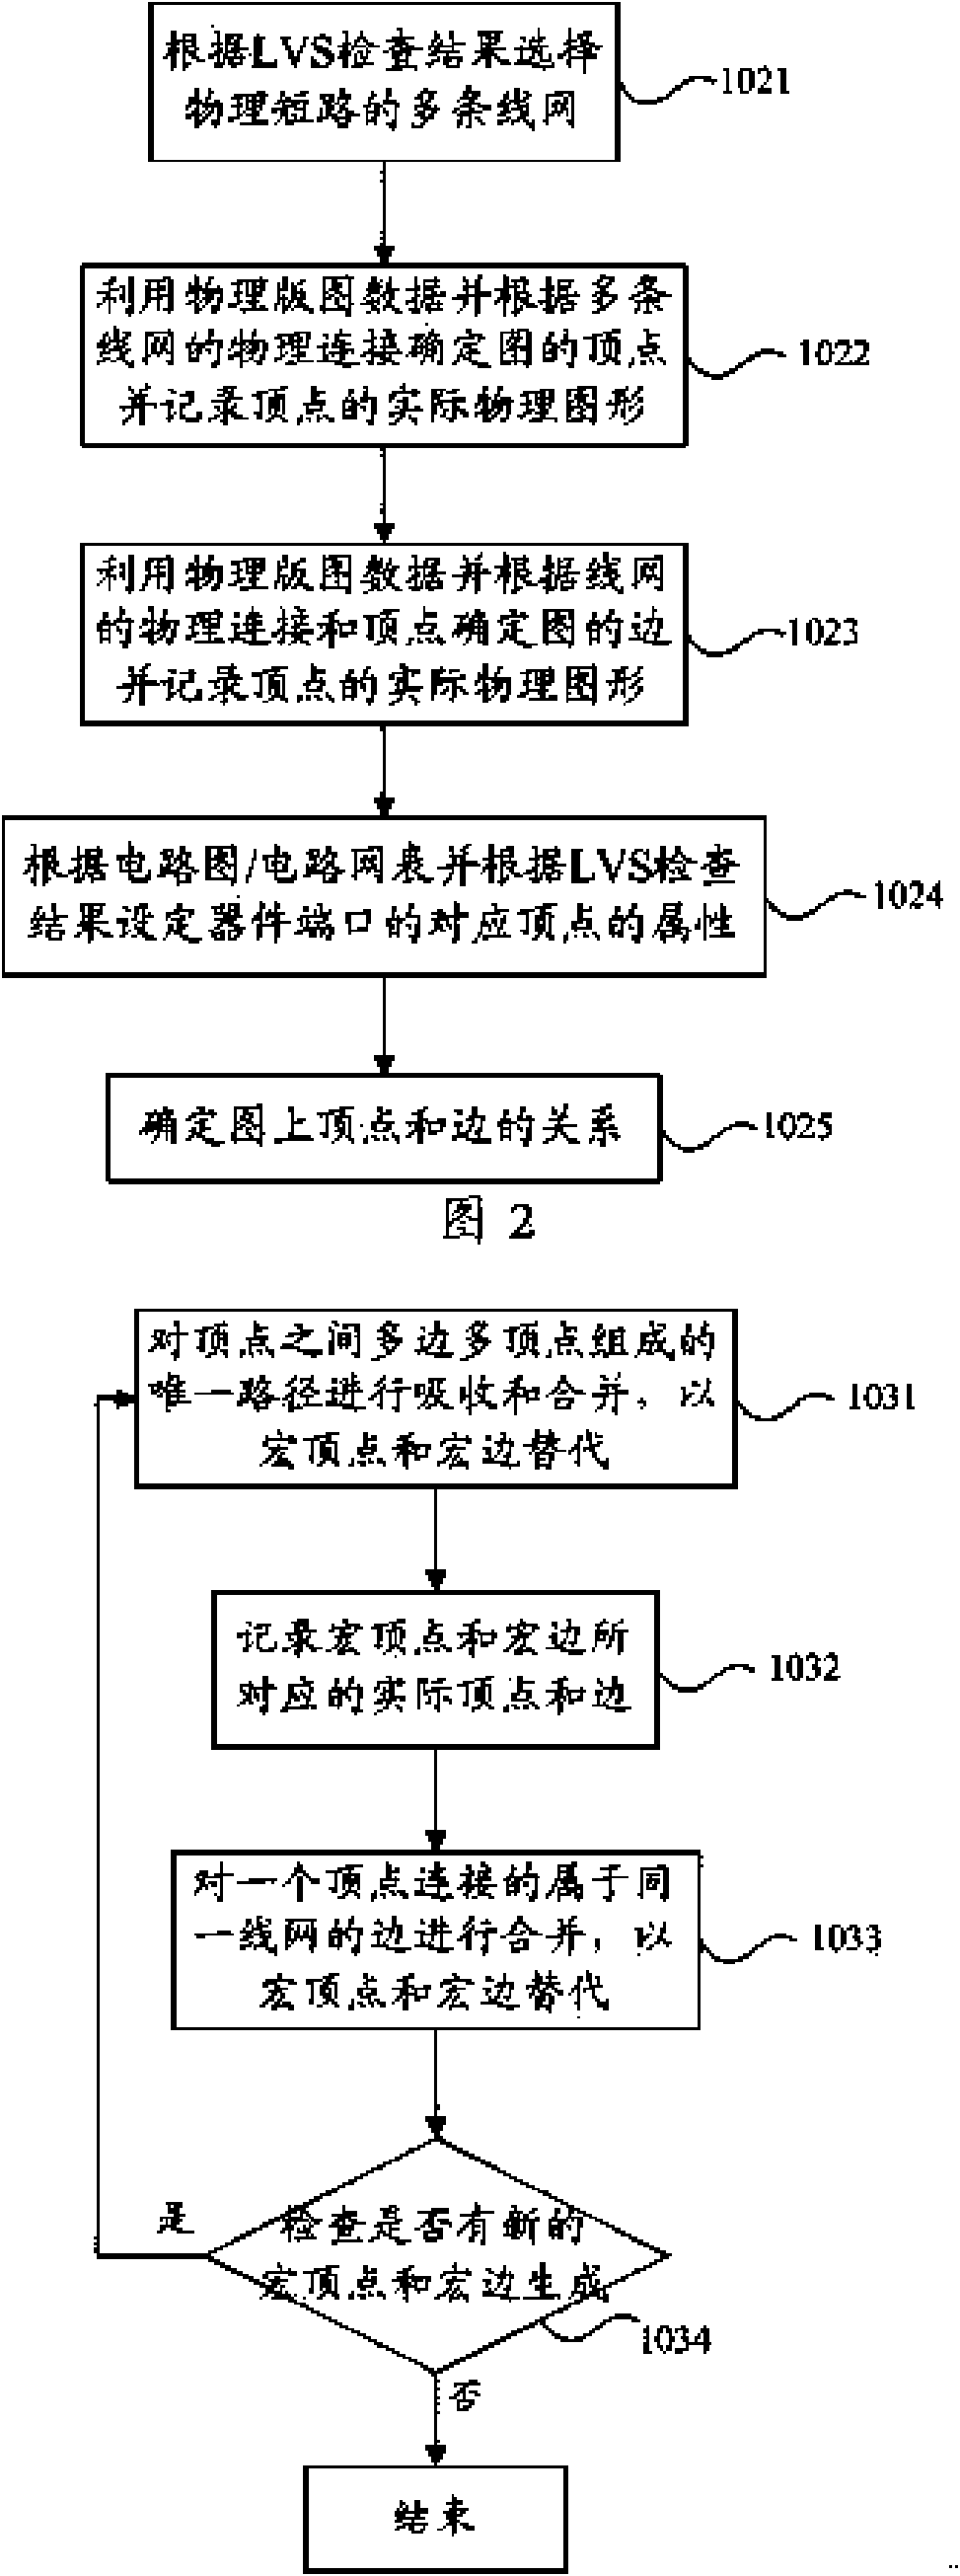 Automatic positioning method for physical short circuit positions among multiple line networks